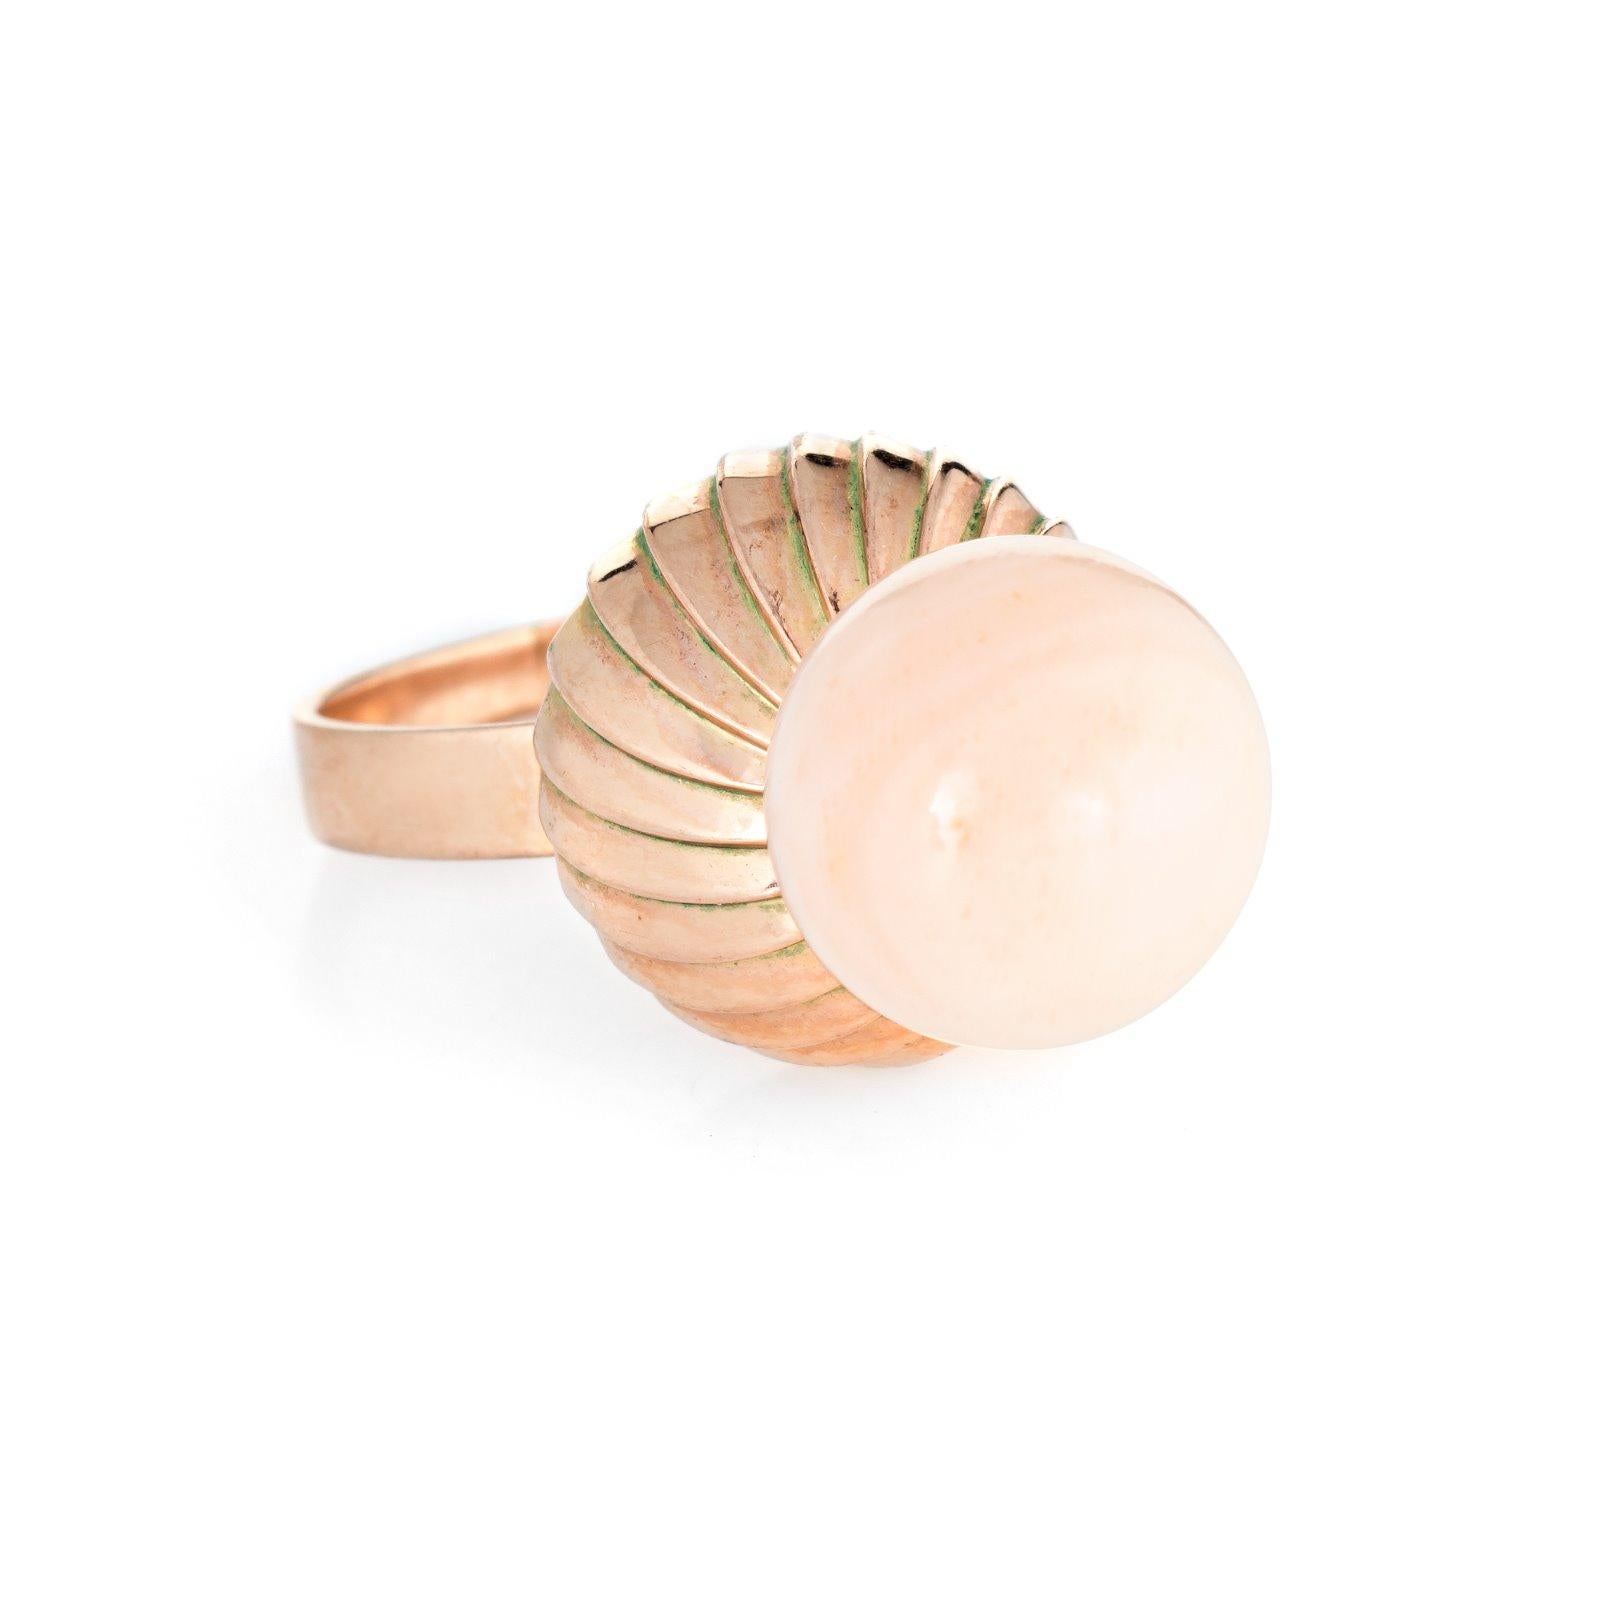 Stylish vintage angel skin coral ring (circa 1960s to 1970s) crafted in 14 karat rose gold. 

Angel skin coral measures 12mm (in excellent condition and free of cracks or chips). 

The coral is perched on top of a high rising textured mount that